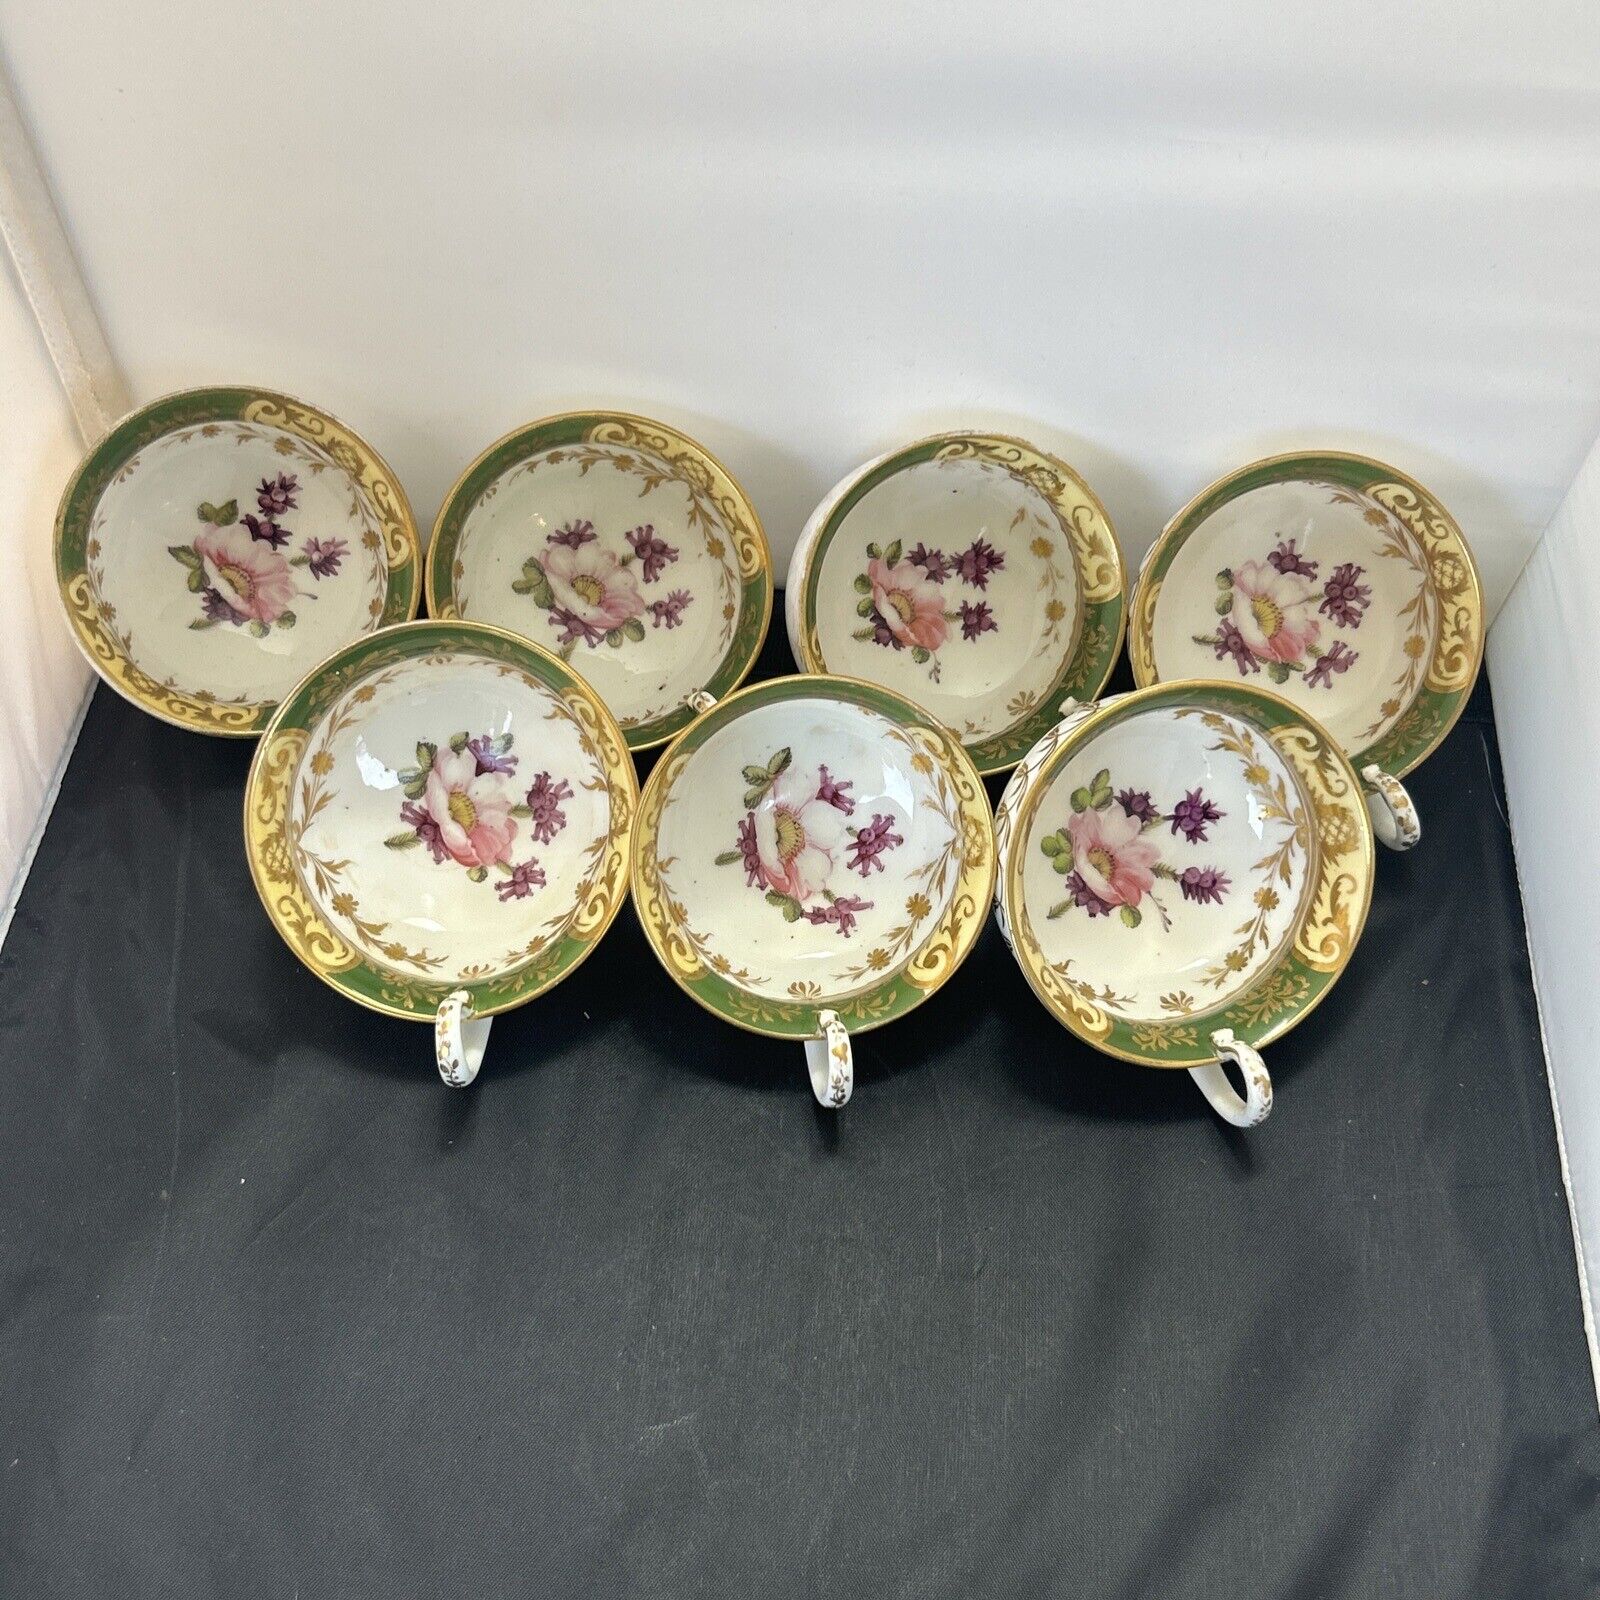 Rare Vintage China Tea Cups White & Gold Rim Accents Pink Floral 1 Single Cup